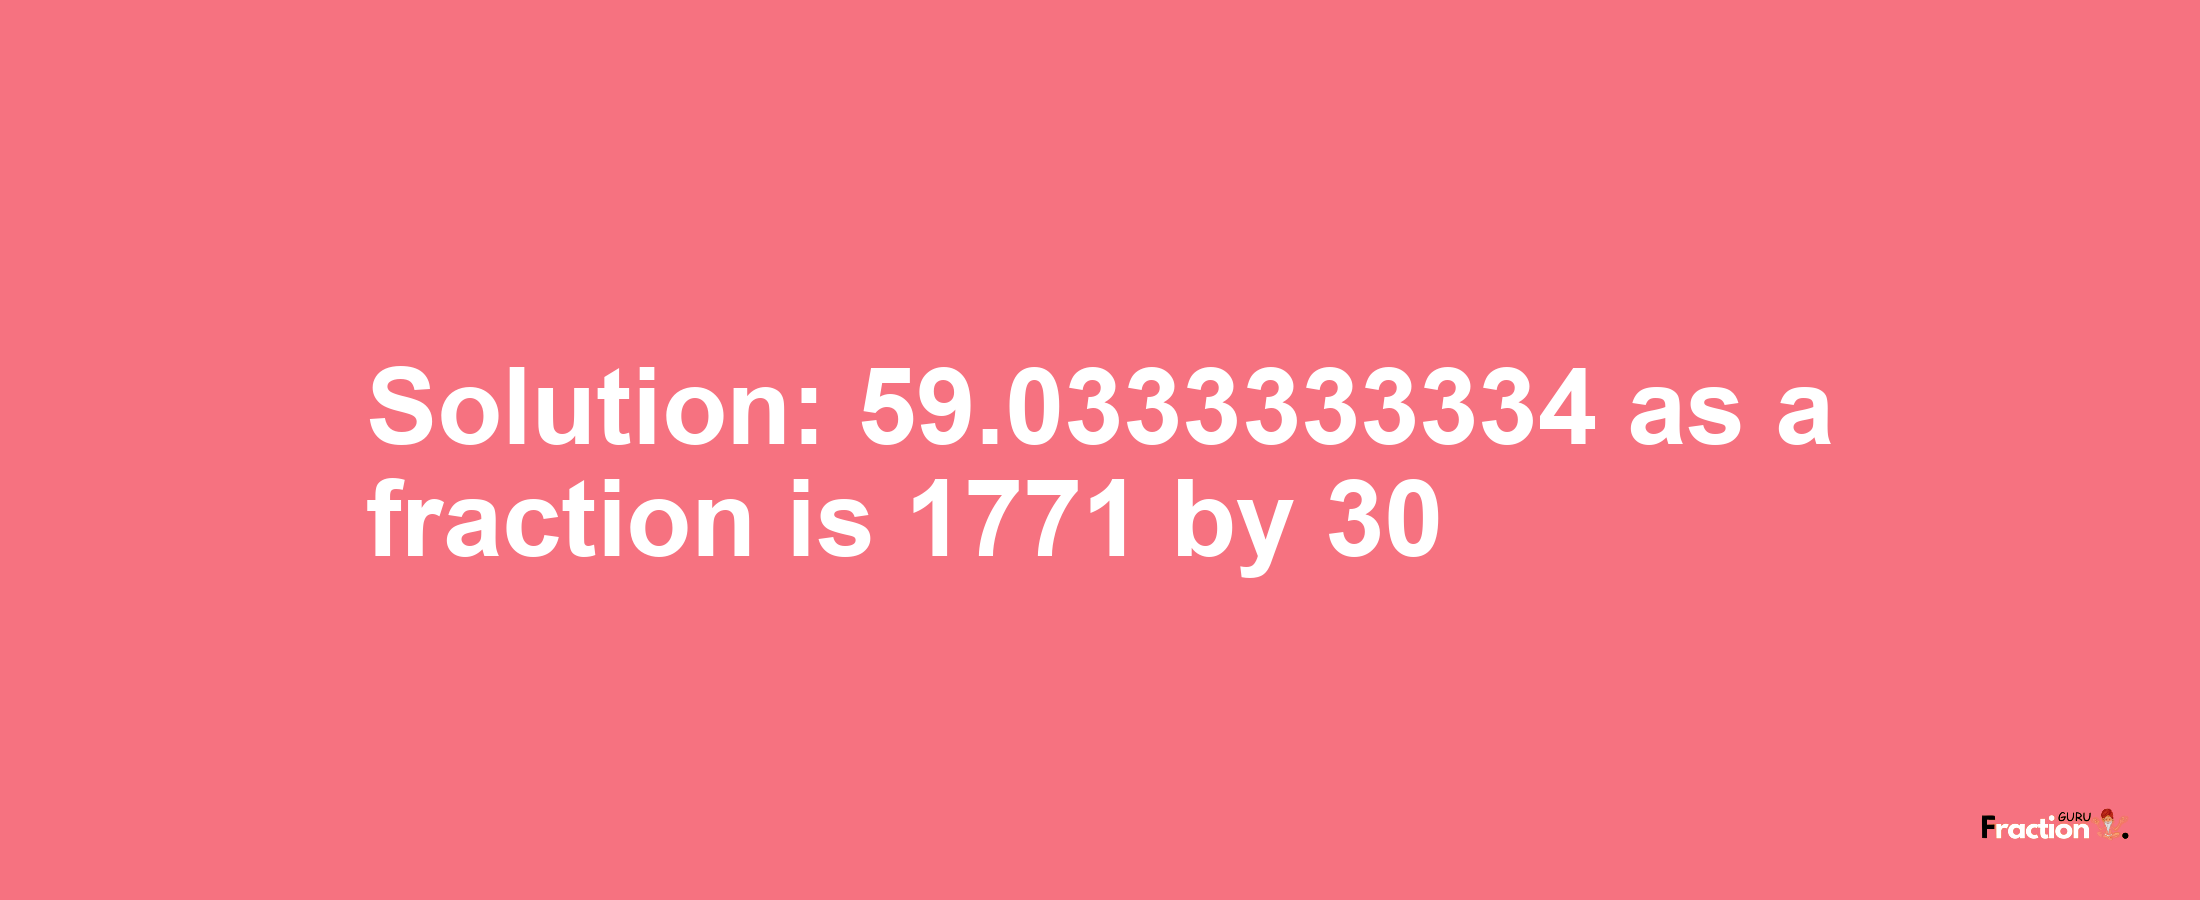 Solution:59.0333333334 as a fraction is 1771/30